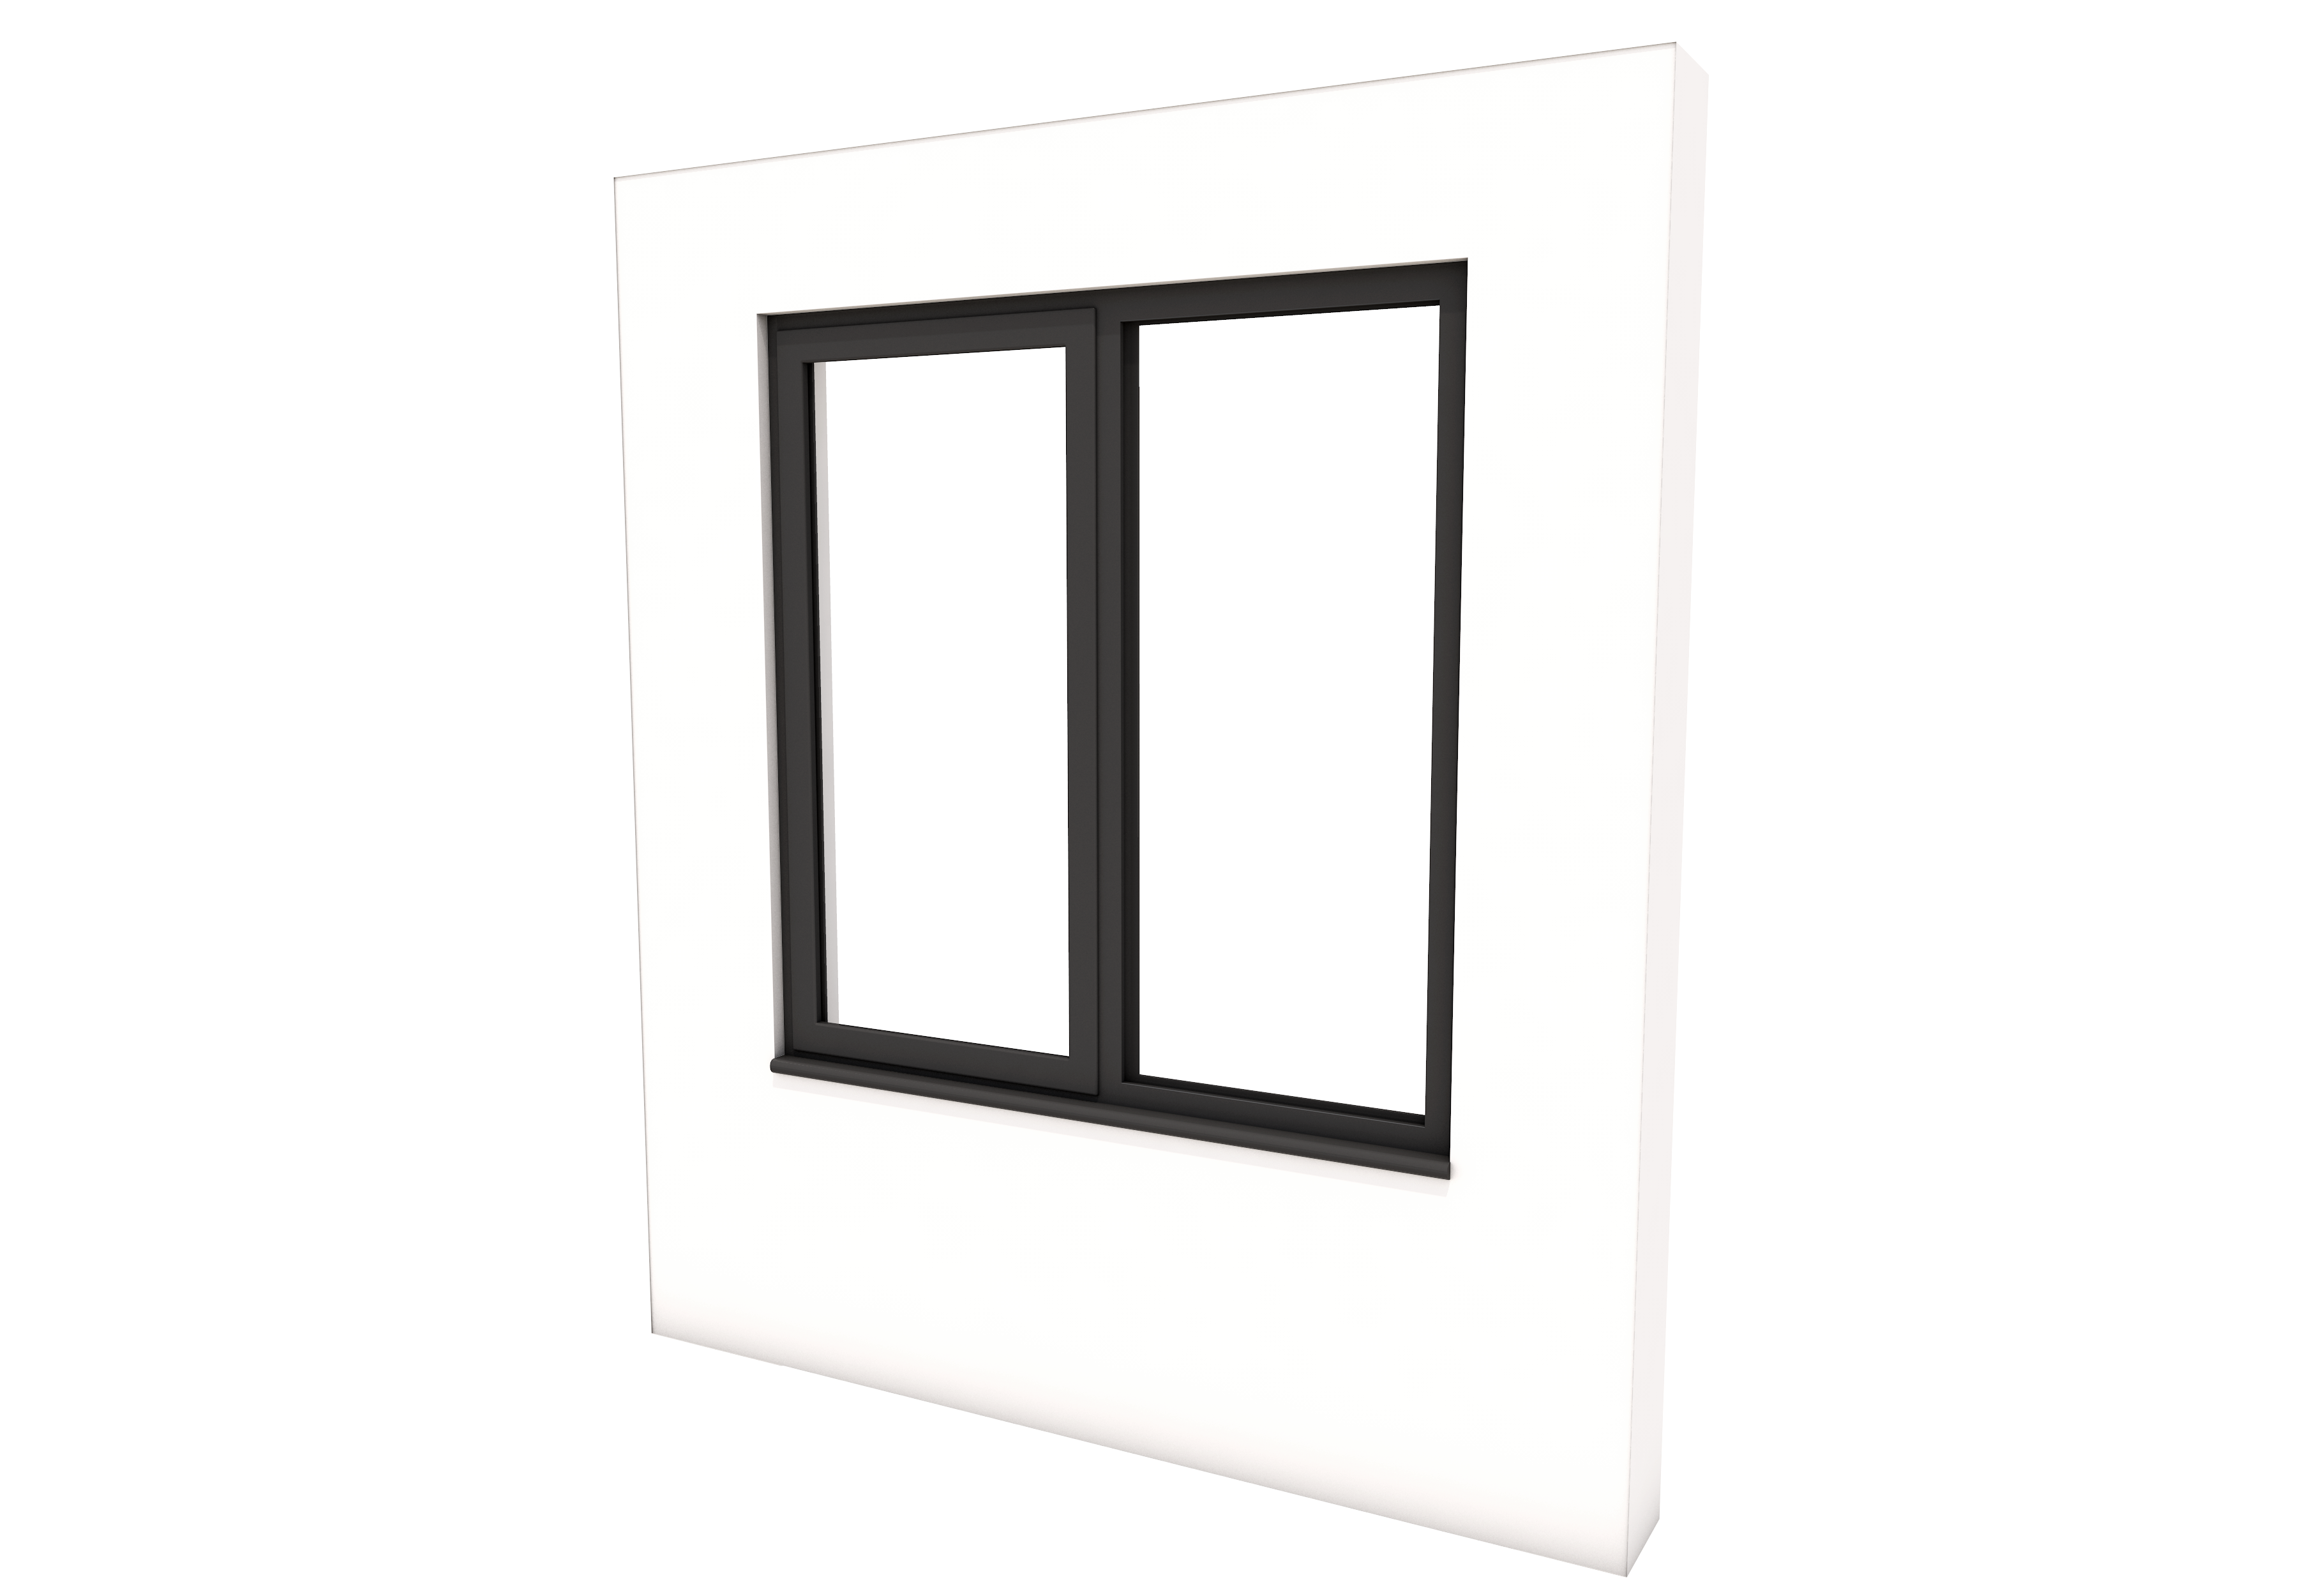 Smart Alitherm 300 Window - 1200 x 1200 mm - Right Fixed